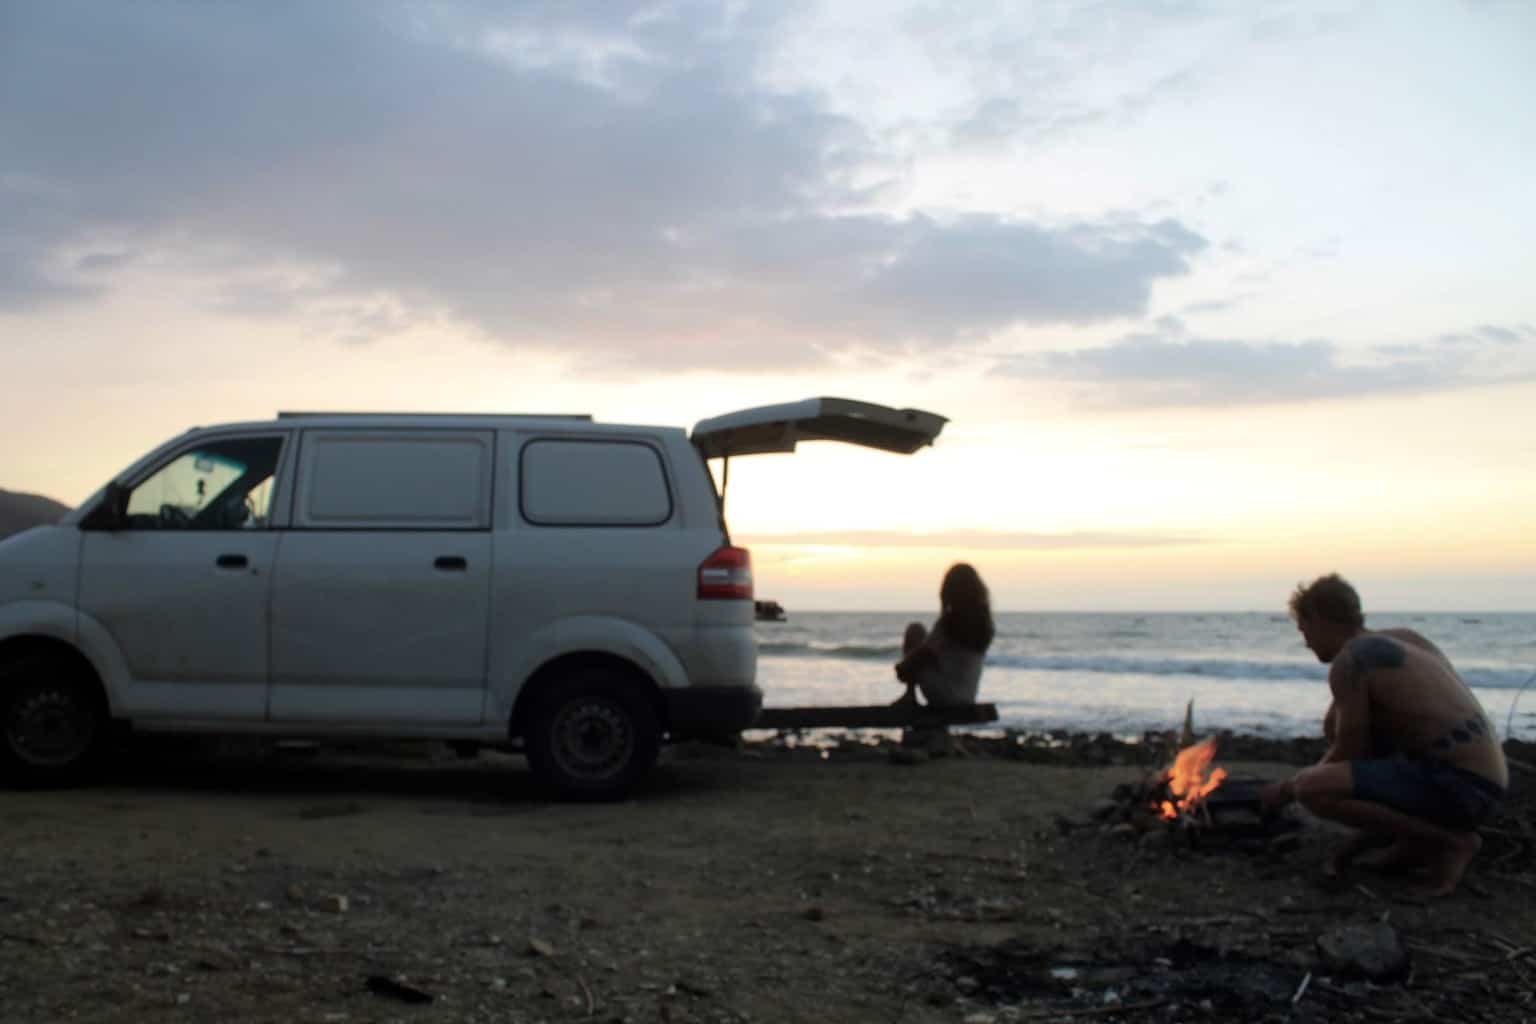 A couple make a fire on the beach next to a van